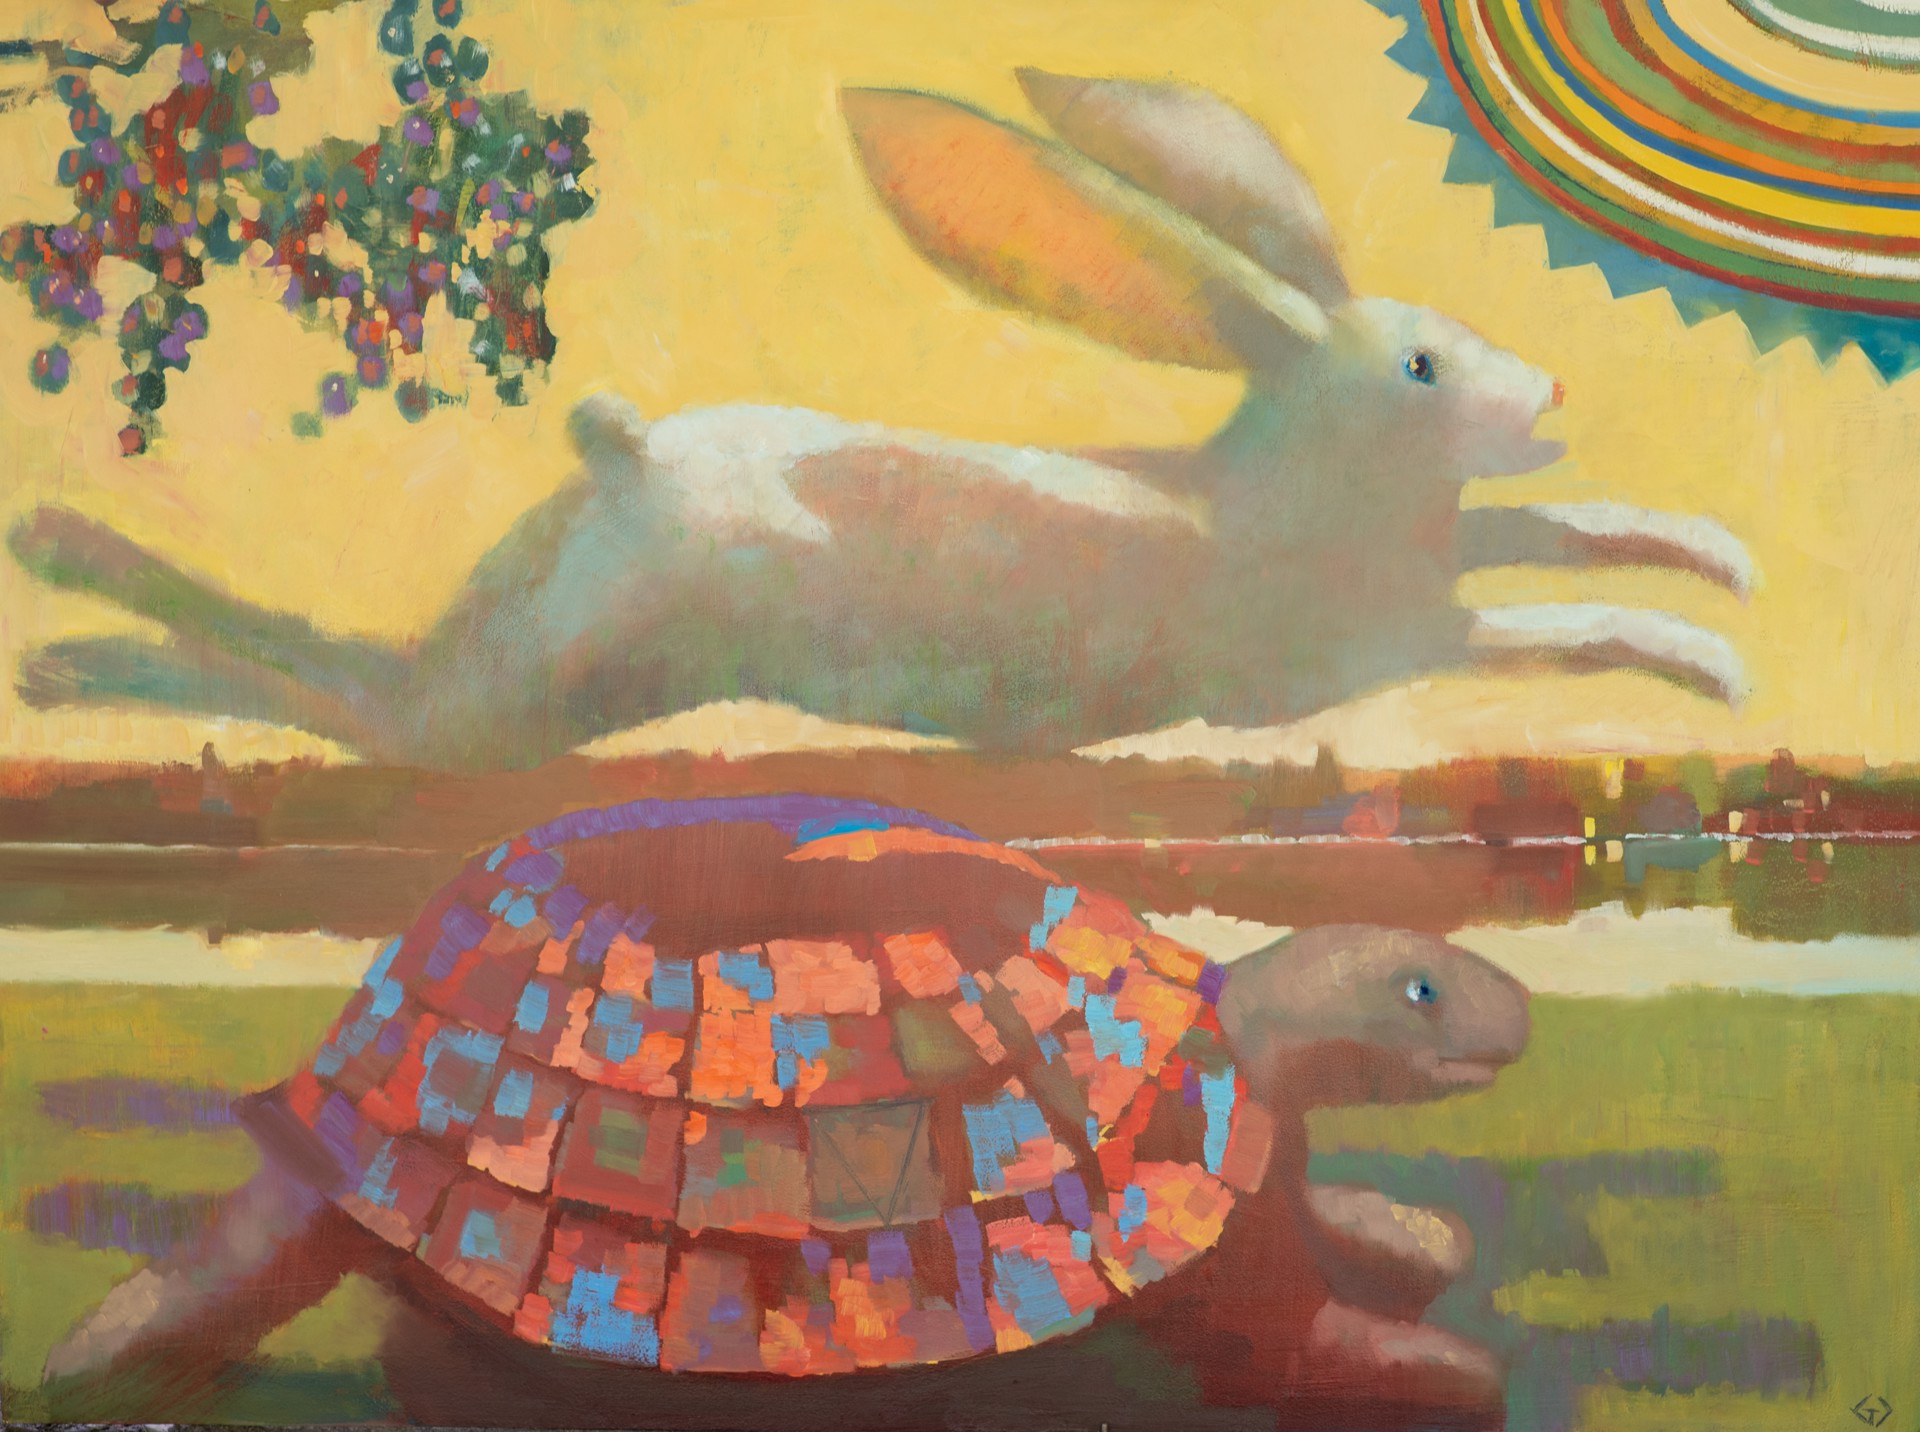 The Tortoise and the Hare by Greg Decker